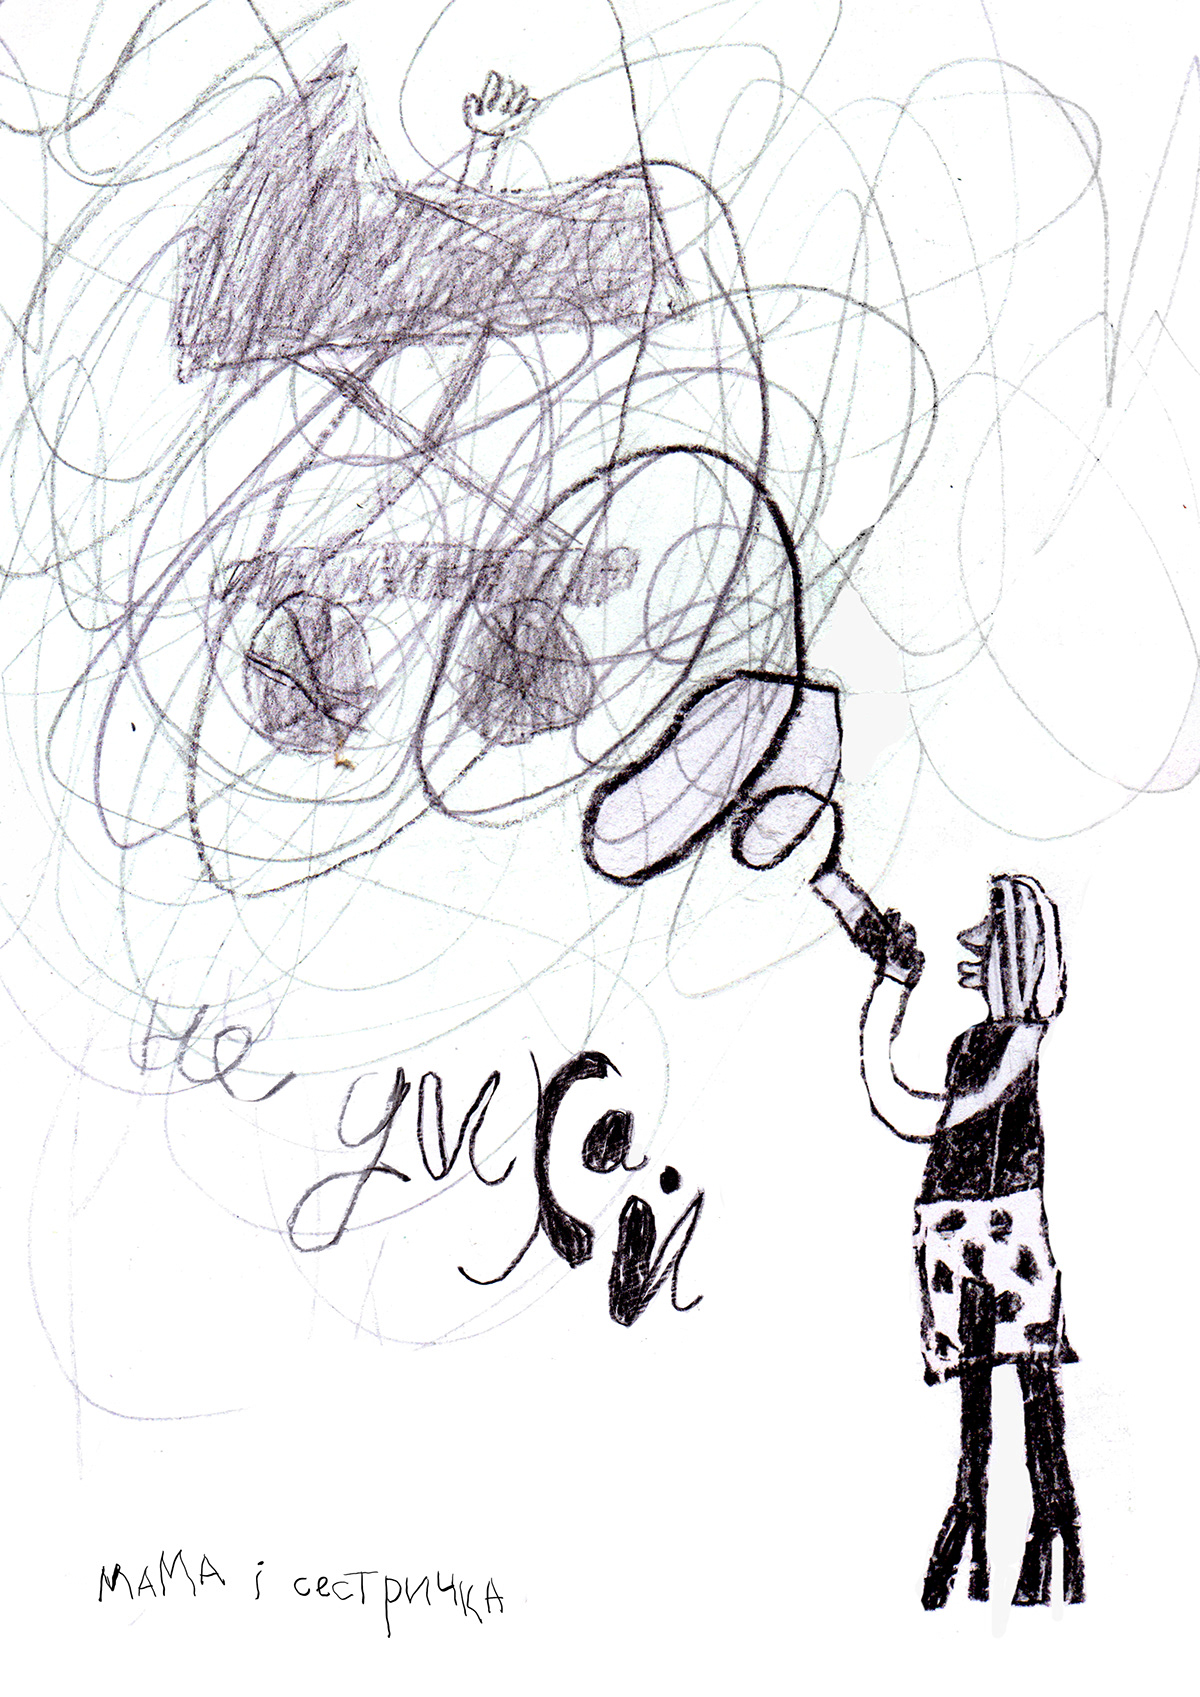 poster graphic design  child abuse social problem violence domestic violence hand drawing